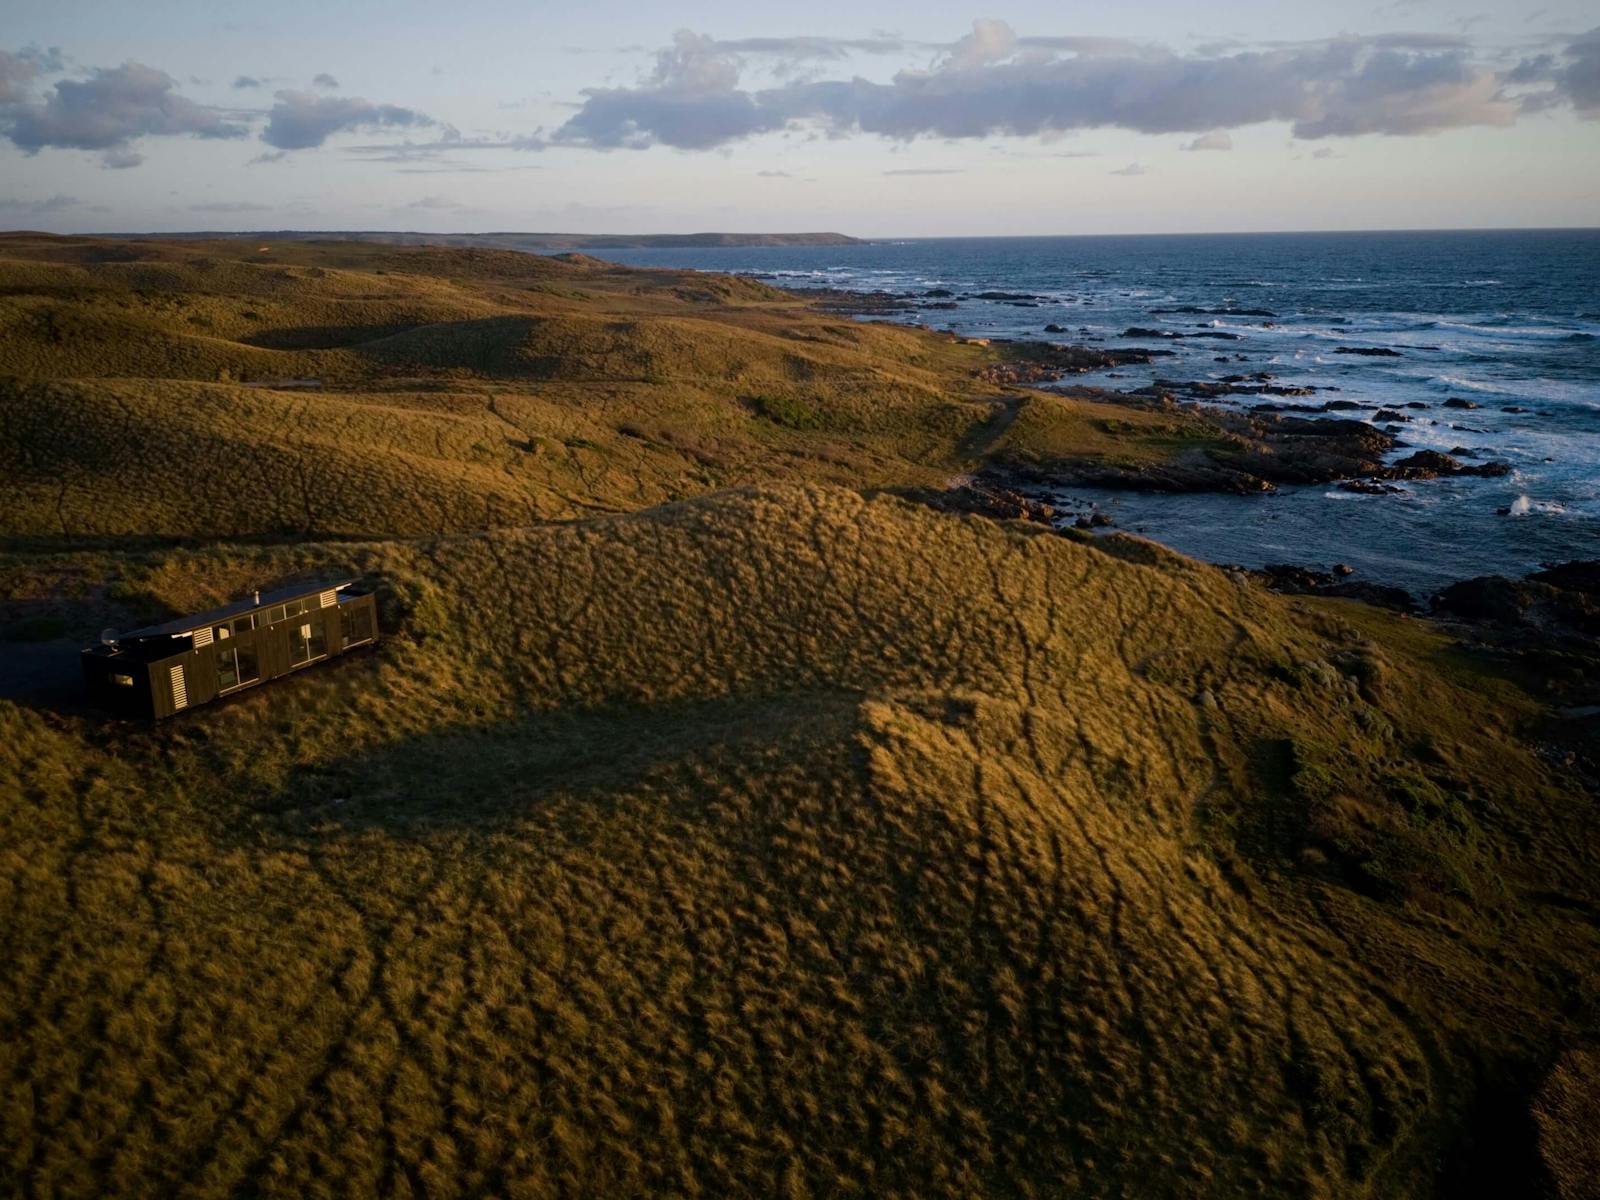 Each lodge sits within 12000 year old grassy sand dunes, on a 96 acre coastal property